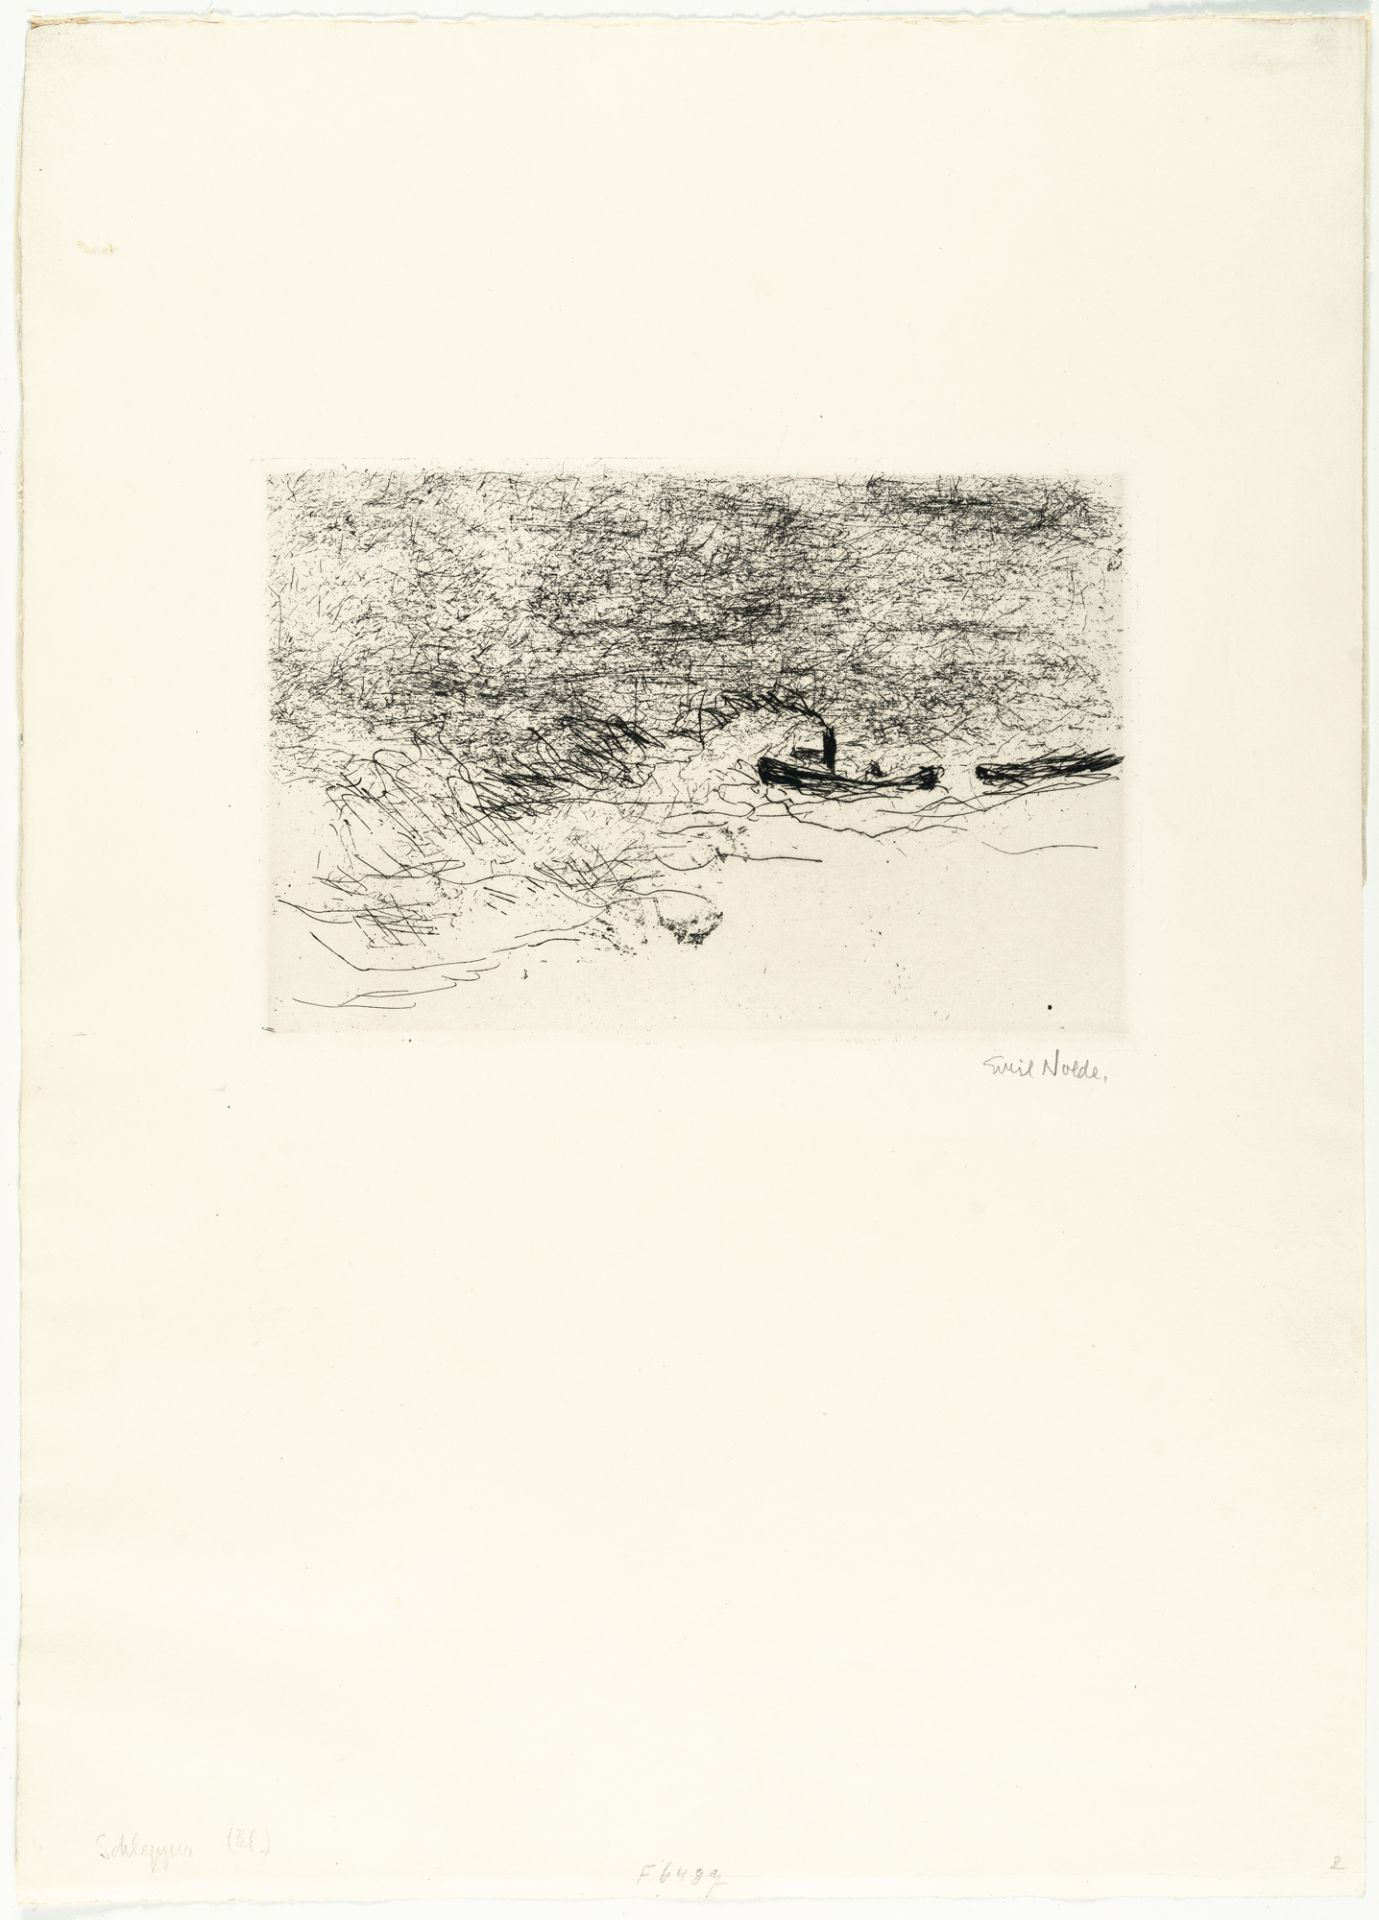 Emil Nolde (1867 Nolde - Seebüll 1956) – Tugboat.Etching with drypoint and finely printed with - Image 2 of 3